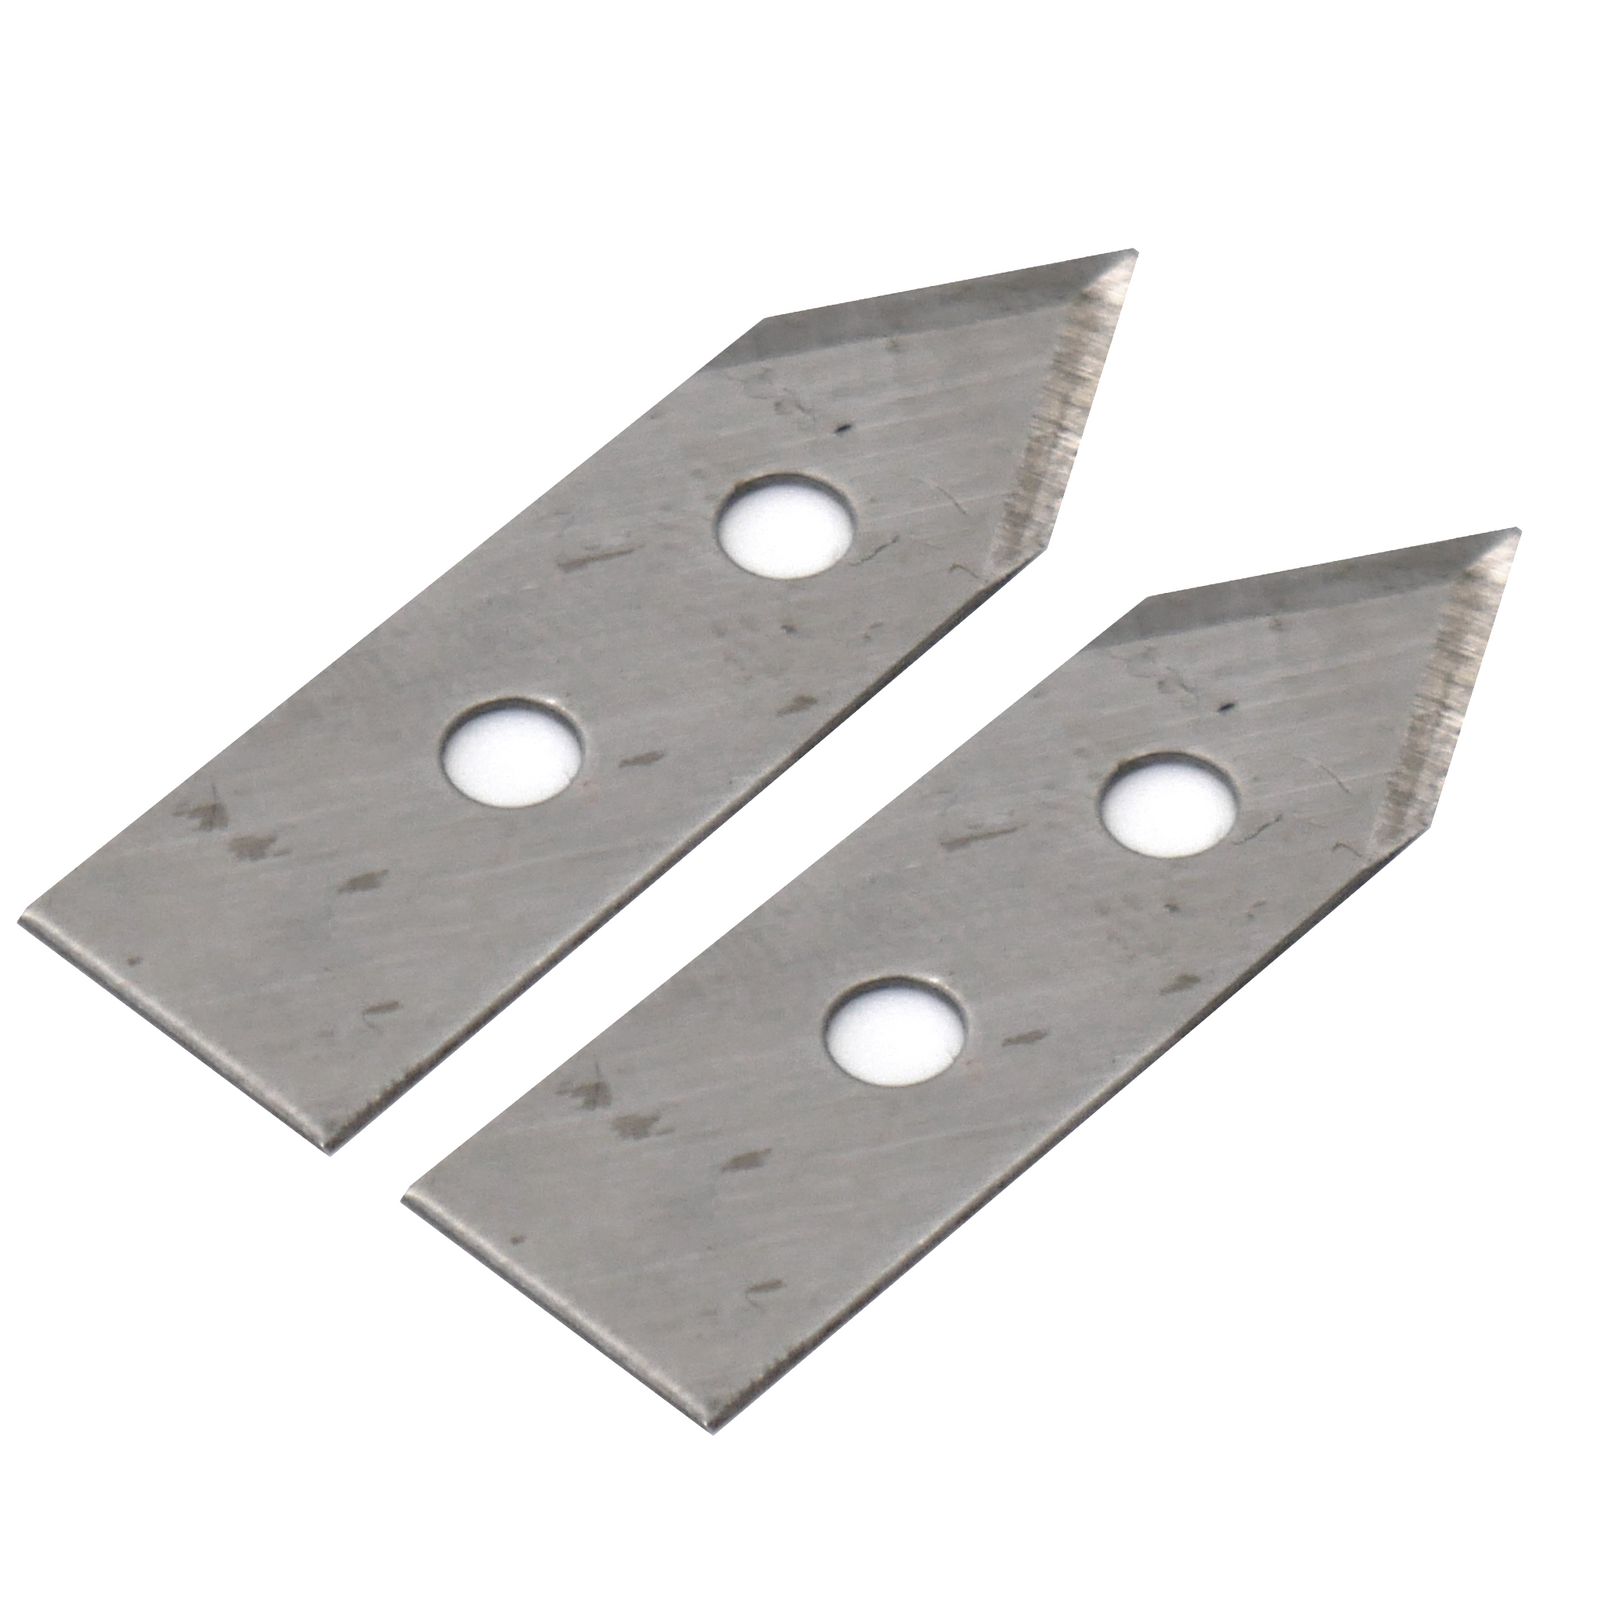 Metal bag cutting blades for manual impulse sealers with cutter